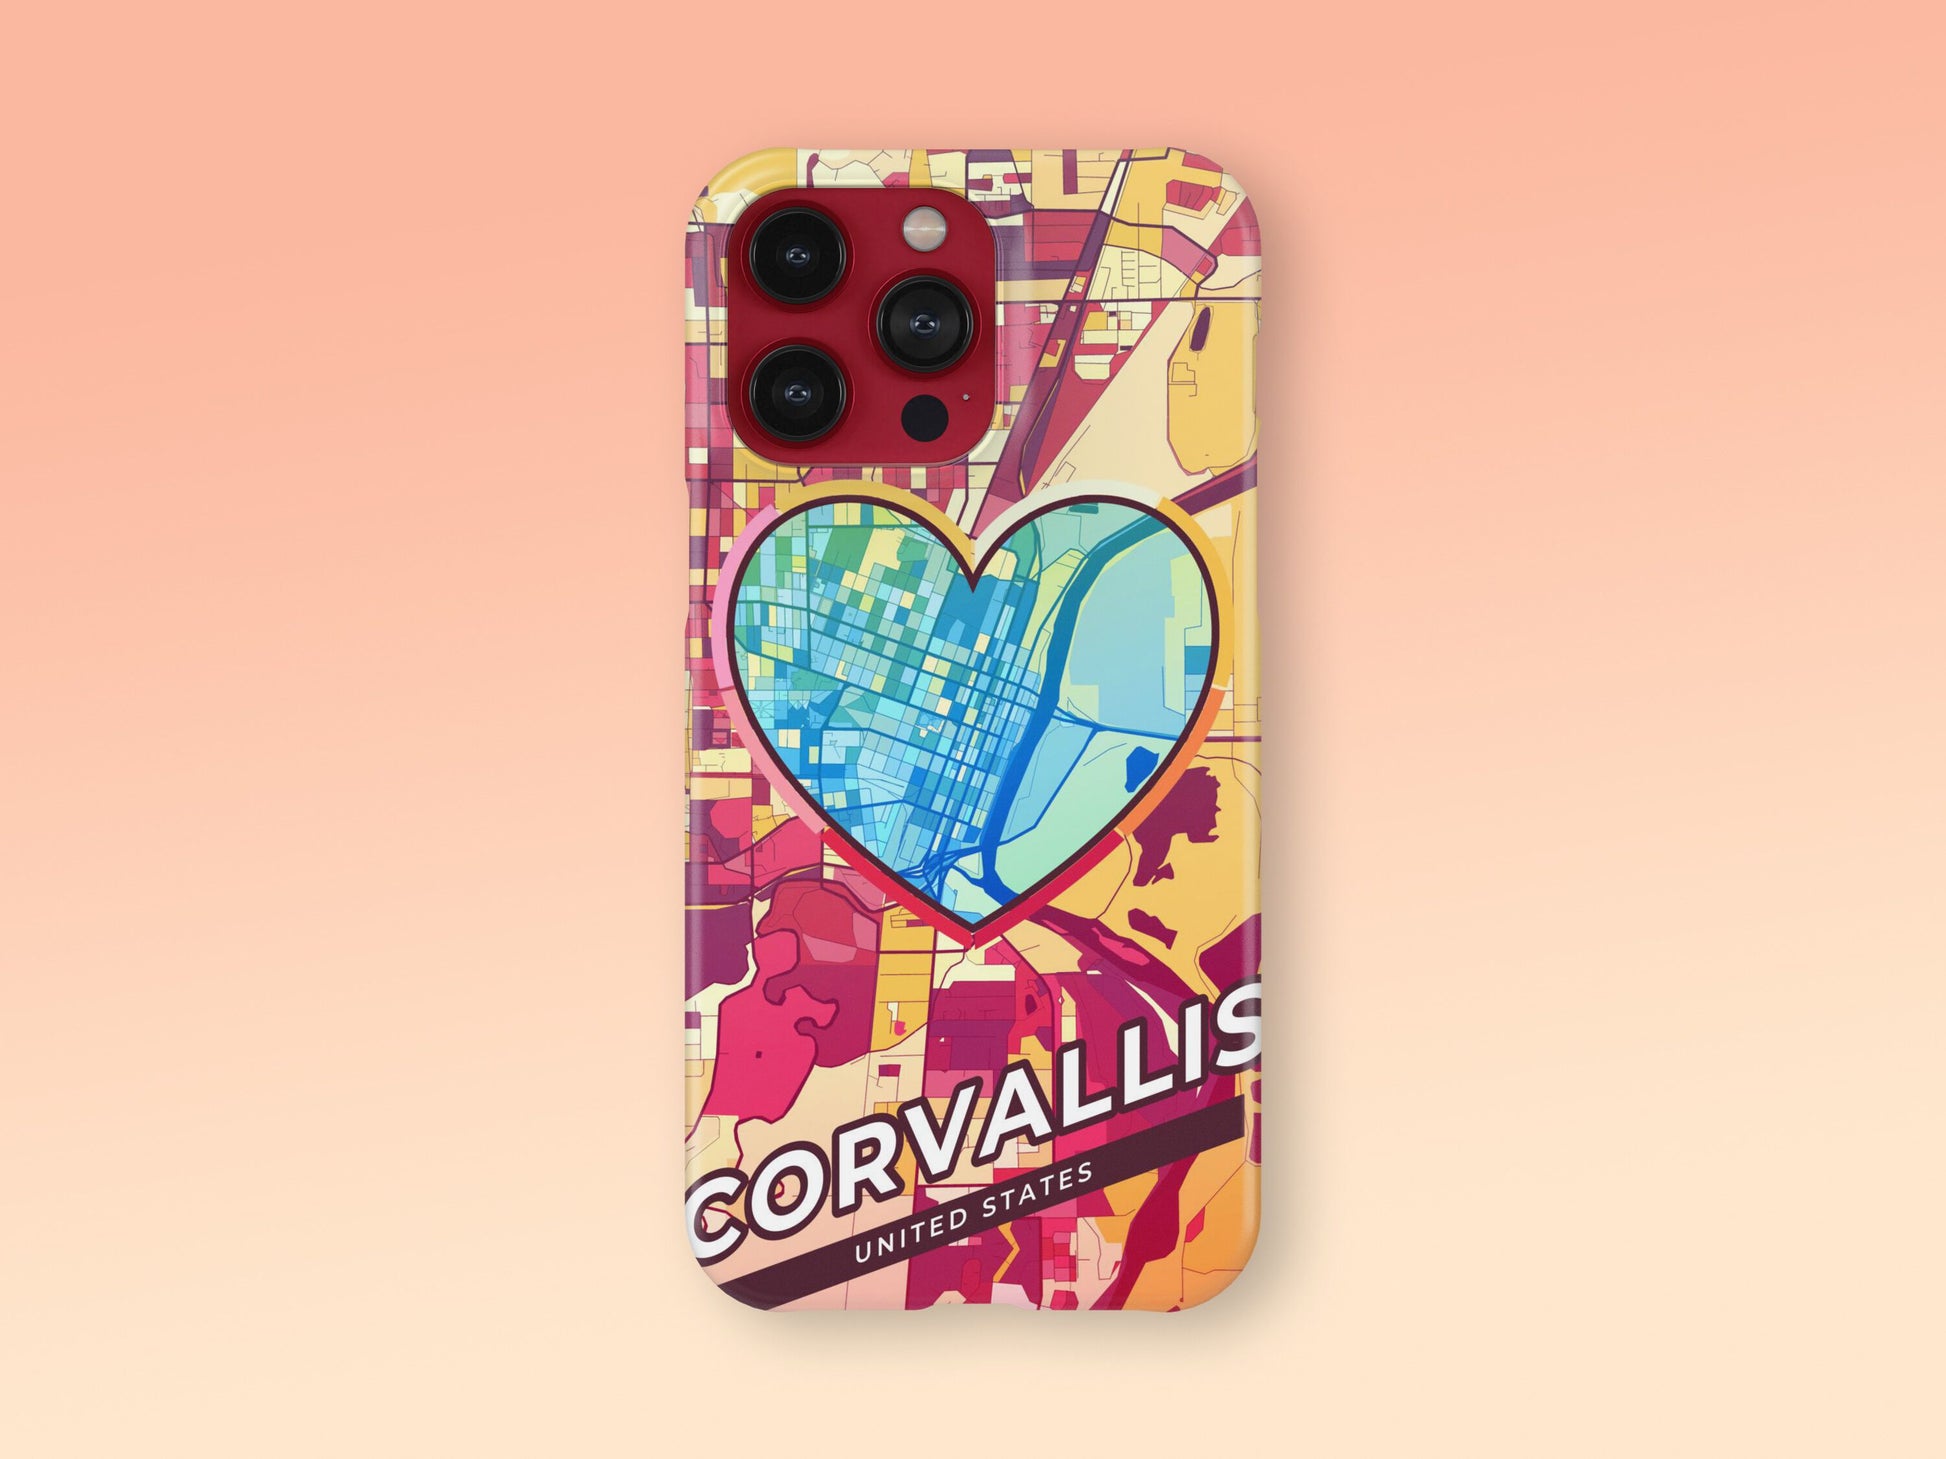 Corvallis Oregon slim phone case with colorful icon. Birthday, wedding or housewarming gift. Couple match cases. 2